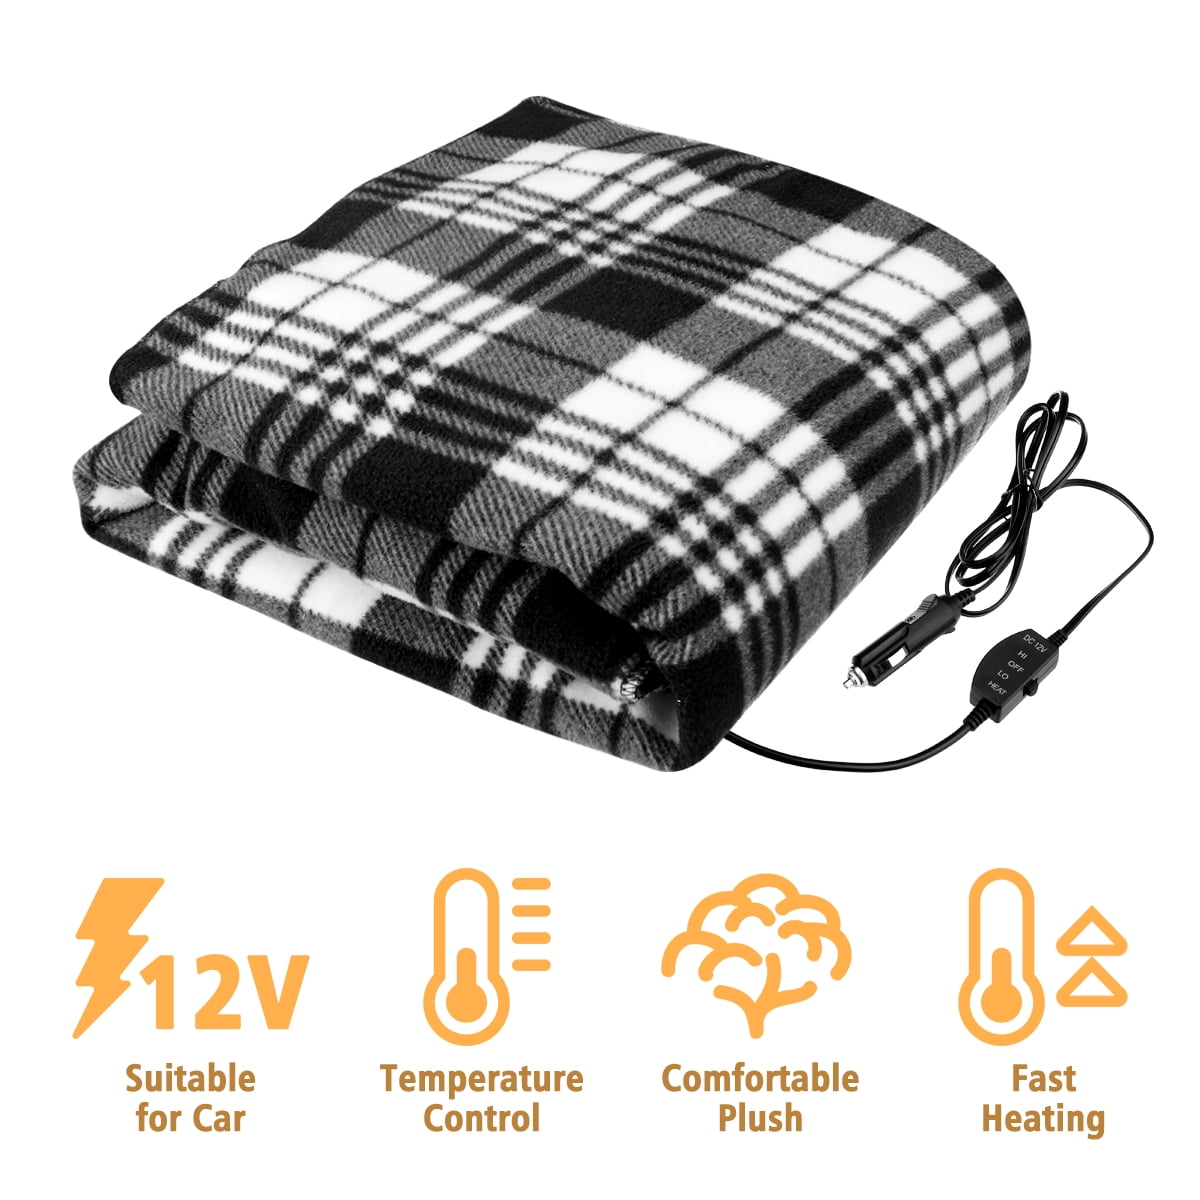 Details about   Easy Controller & Quick Warm 12V Heated Electric Car Blanket for Cold Weather 